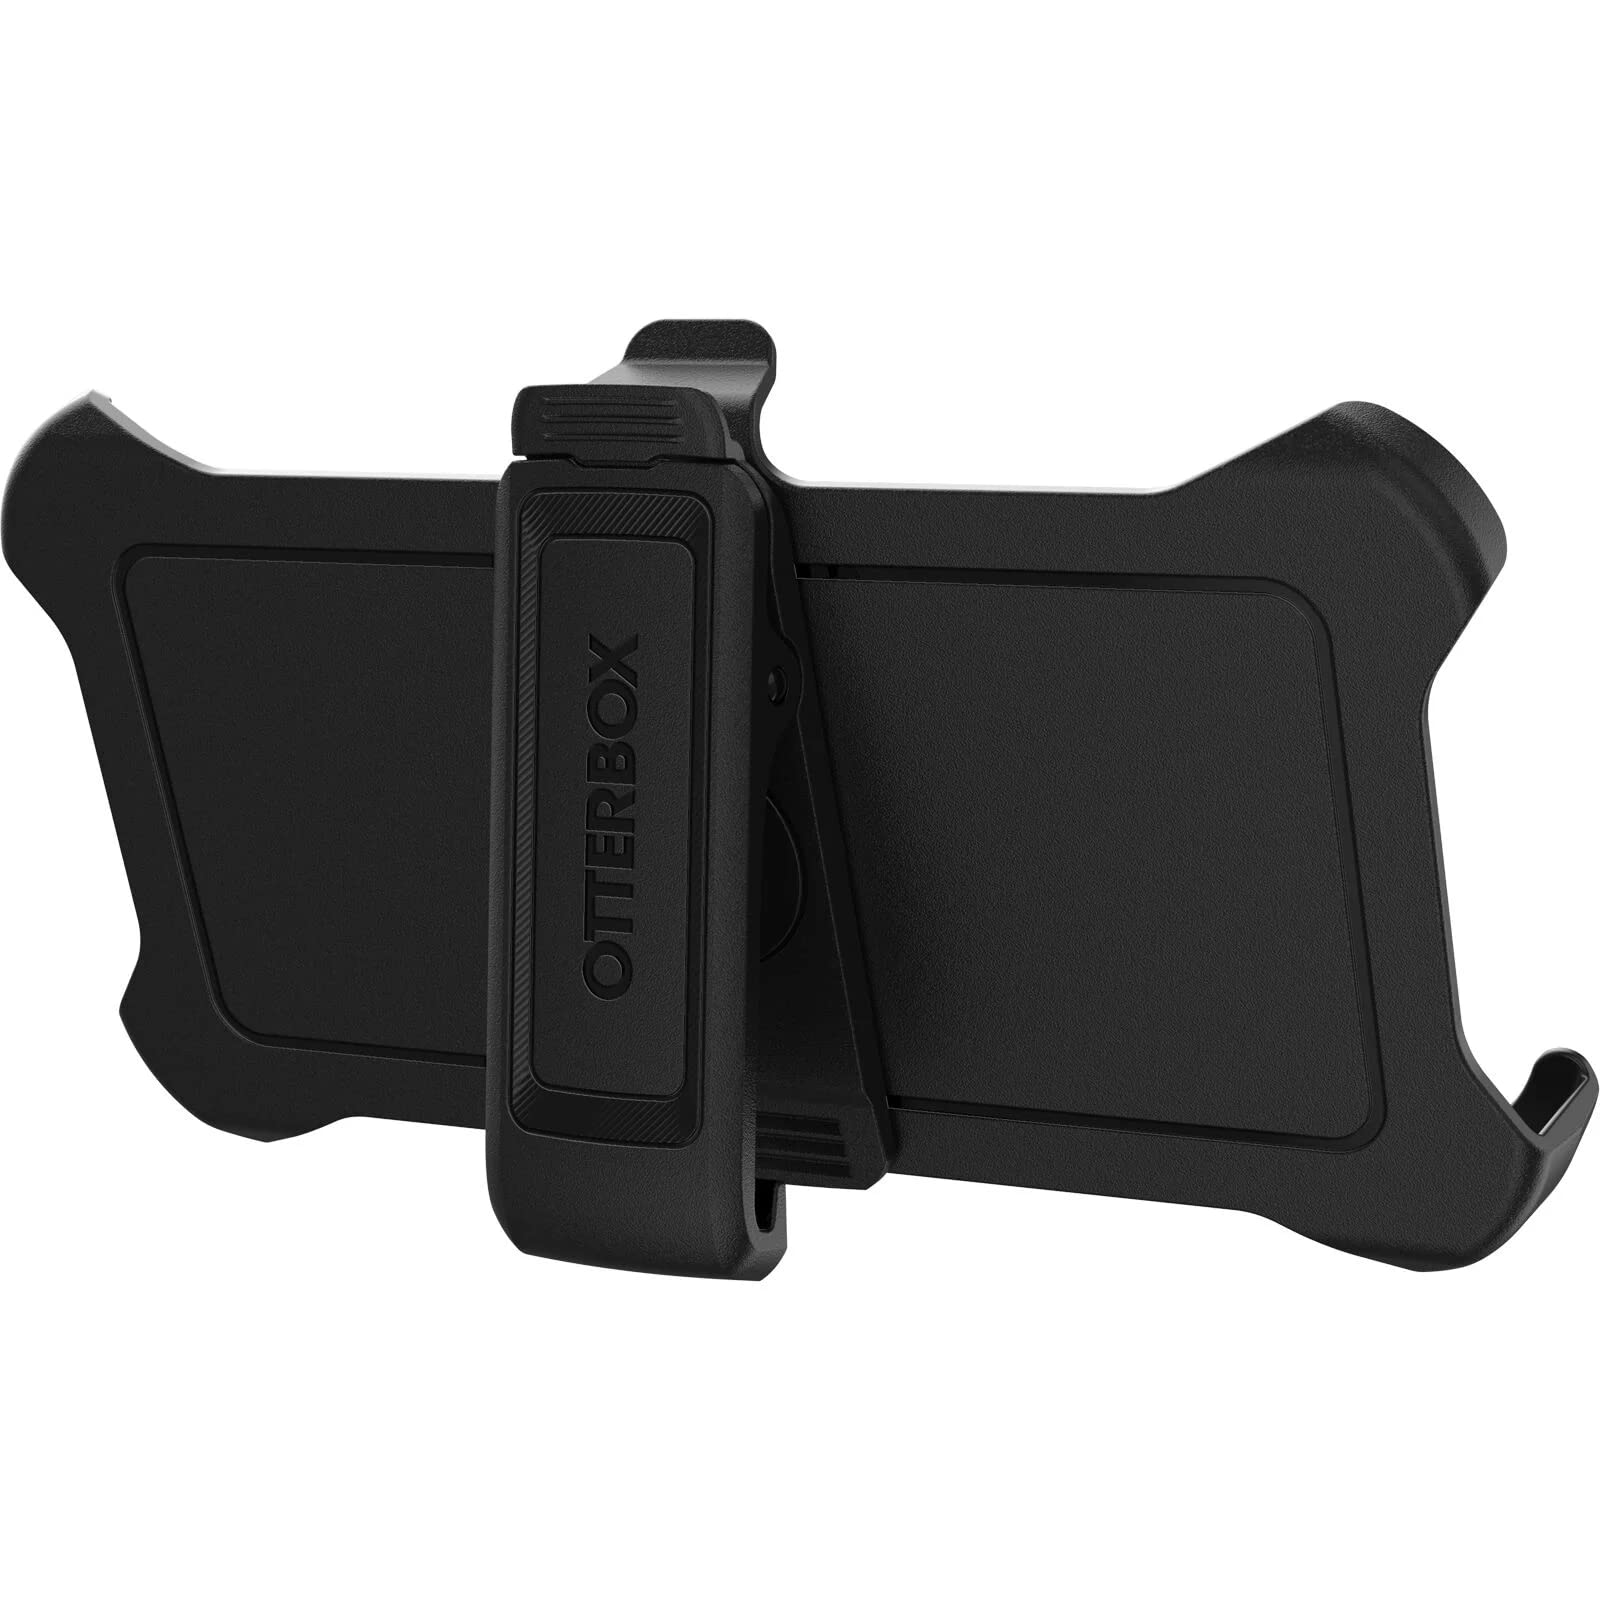 OtterBox Defender Series Holster Belt Clip Replacement for iPhone 13 Pro Max & iPhone 12 Pro Max (Only) - Non-Retail Packaging - Black